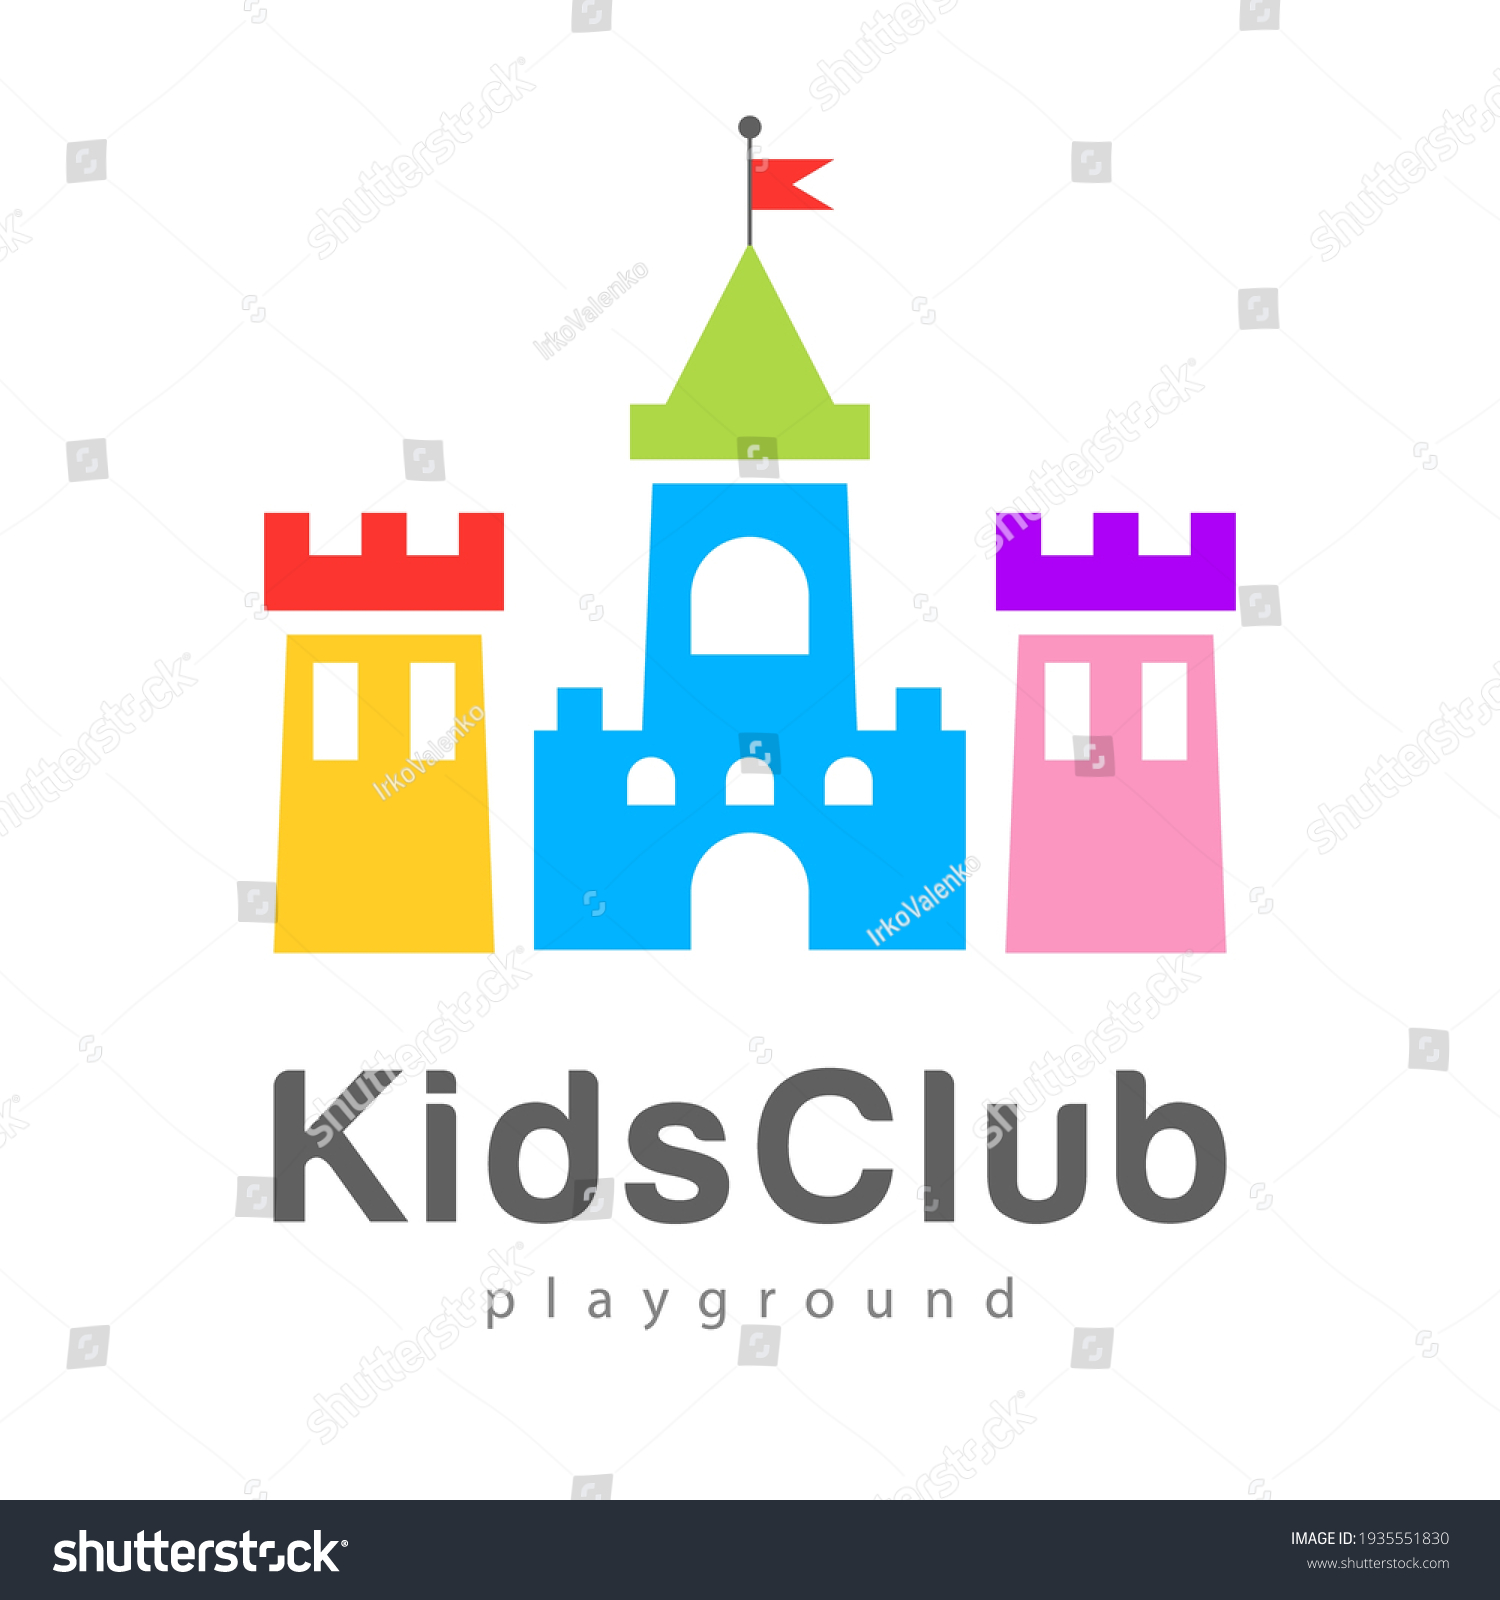 SVG of Abstract kids city logo playground,kids zone icon,king castle sign,bastion symbol.Design template bright logotype kids club,shop,wooden toys store,children play,baby center or park.Vector illustration svg